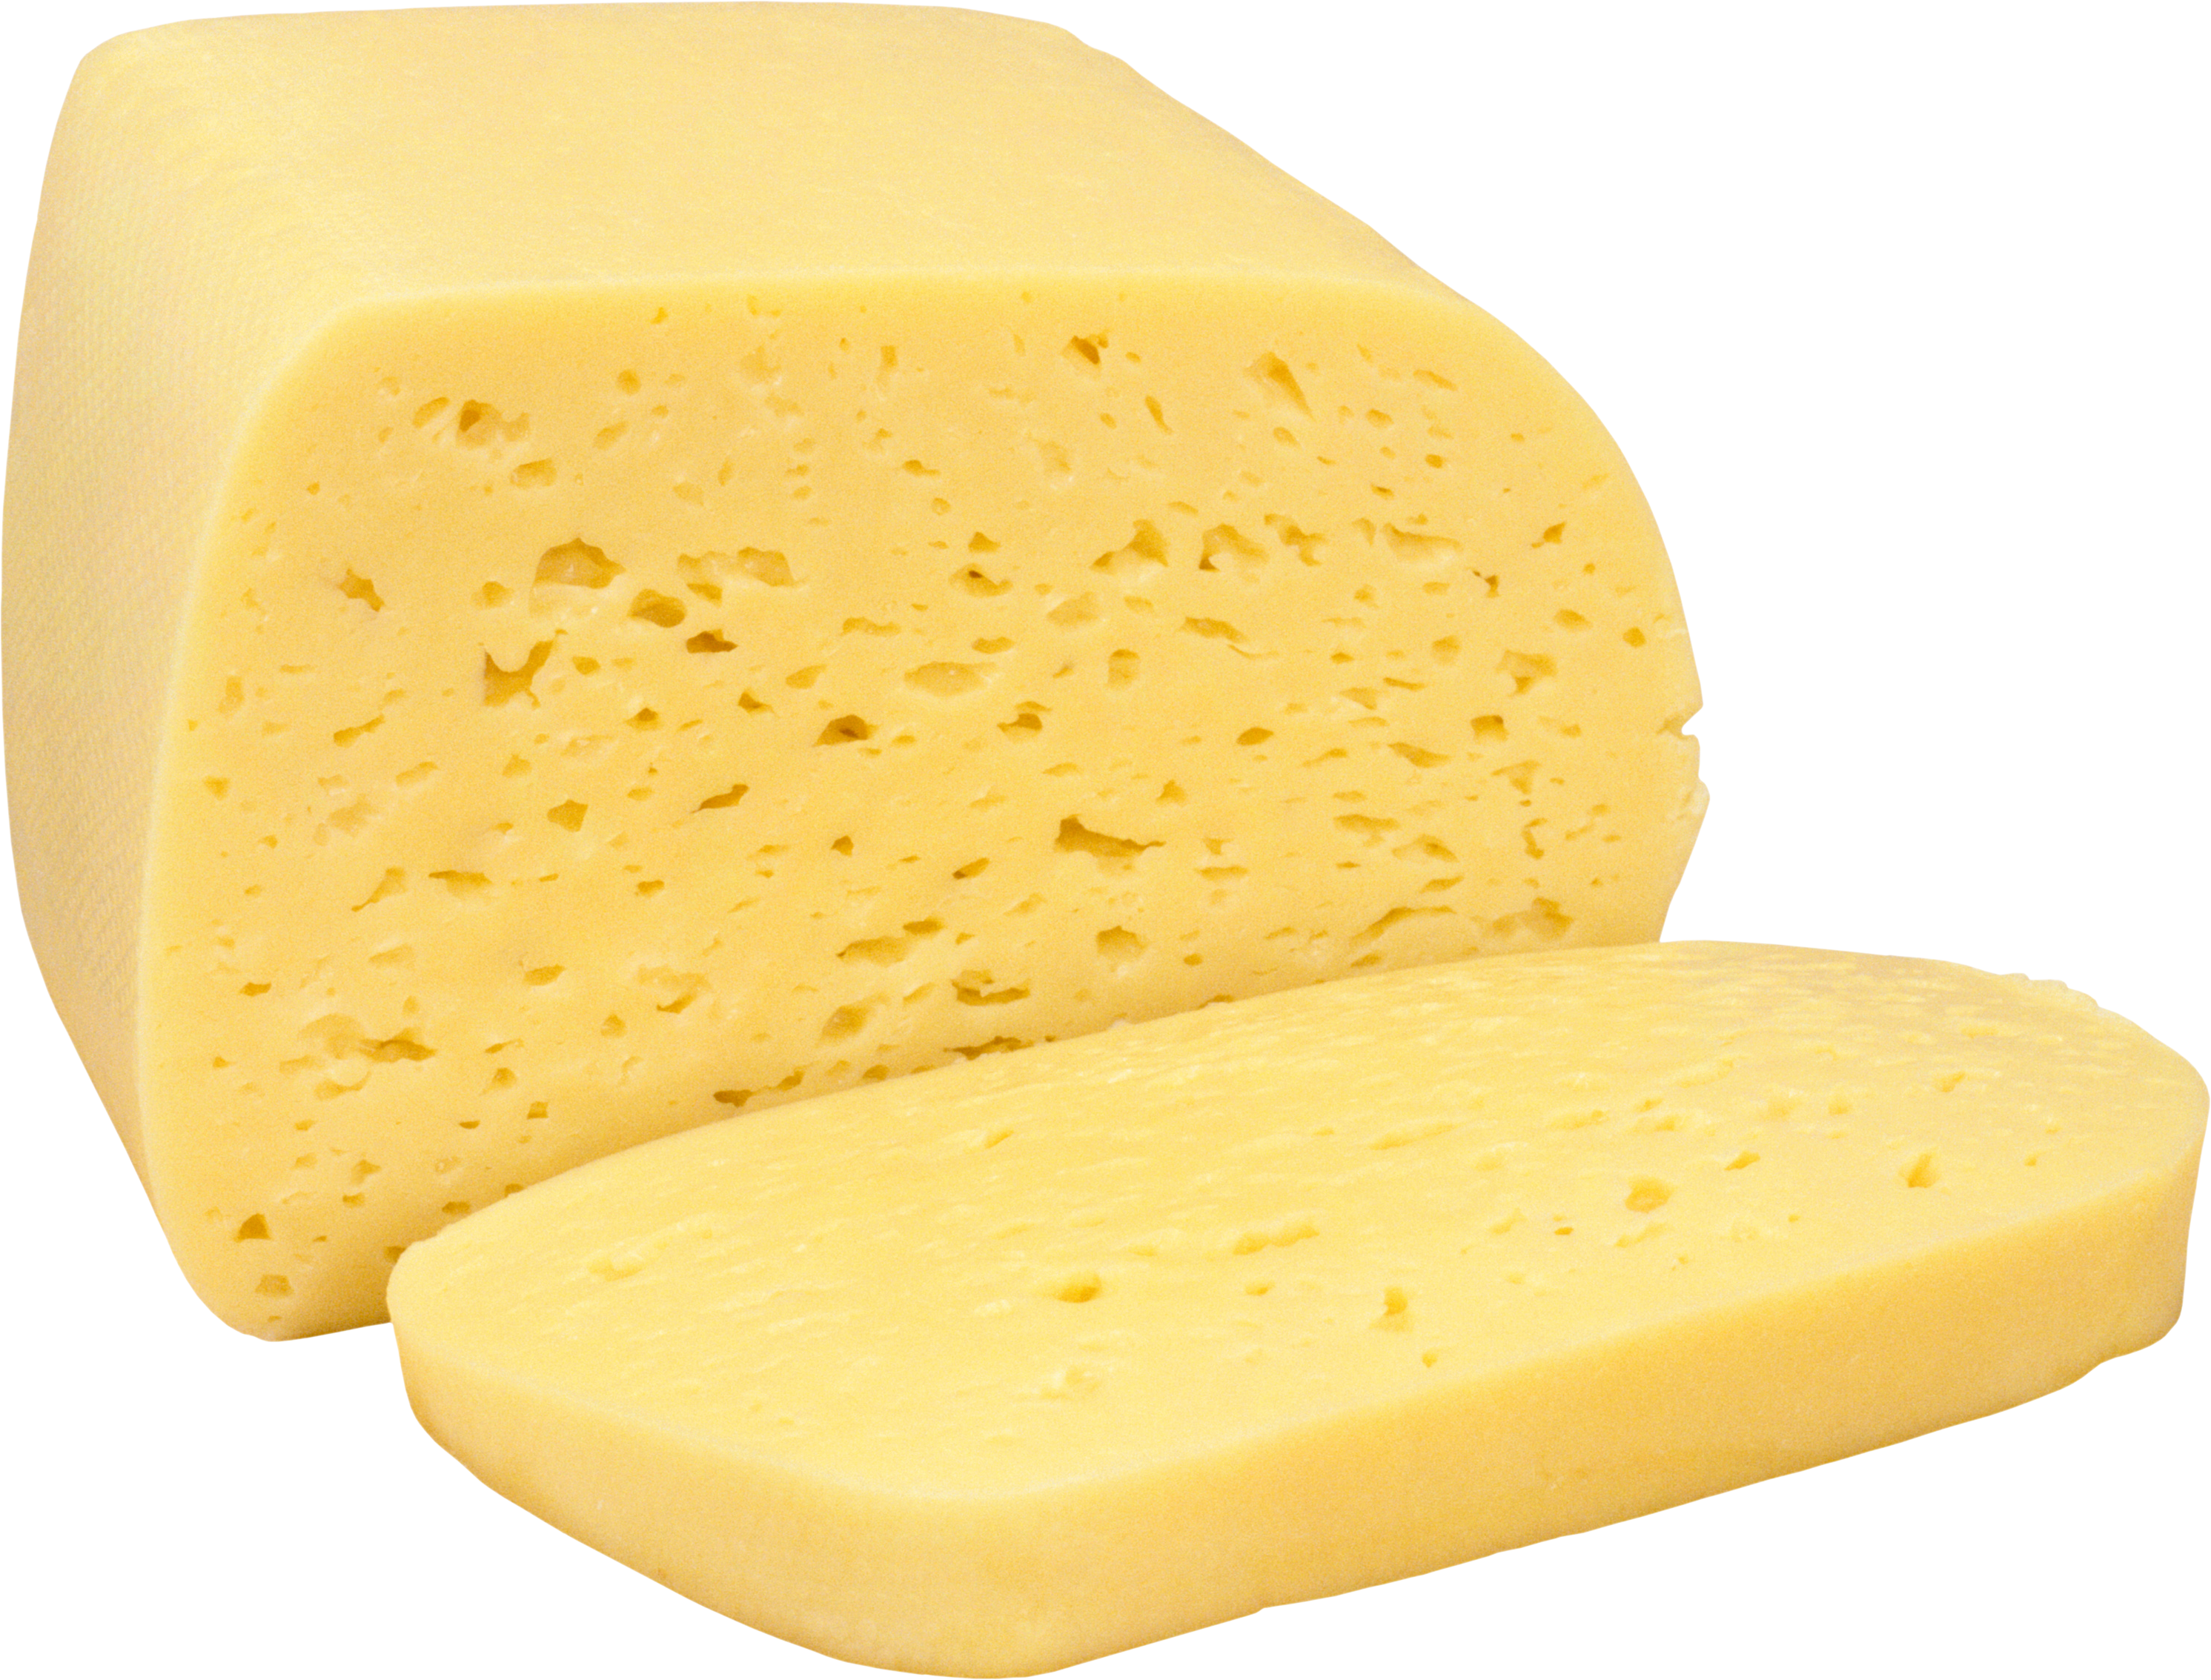 Fromage PNG Gratuit Telecharger